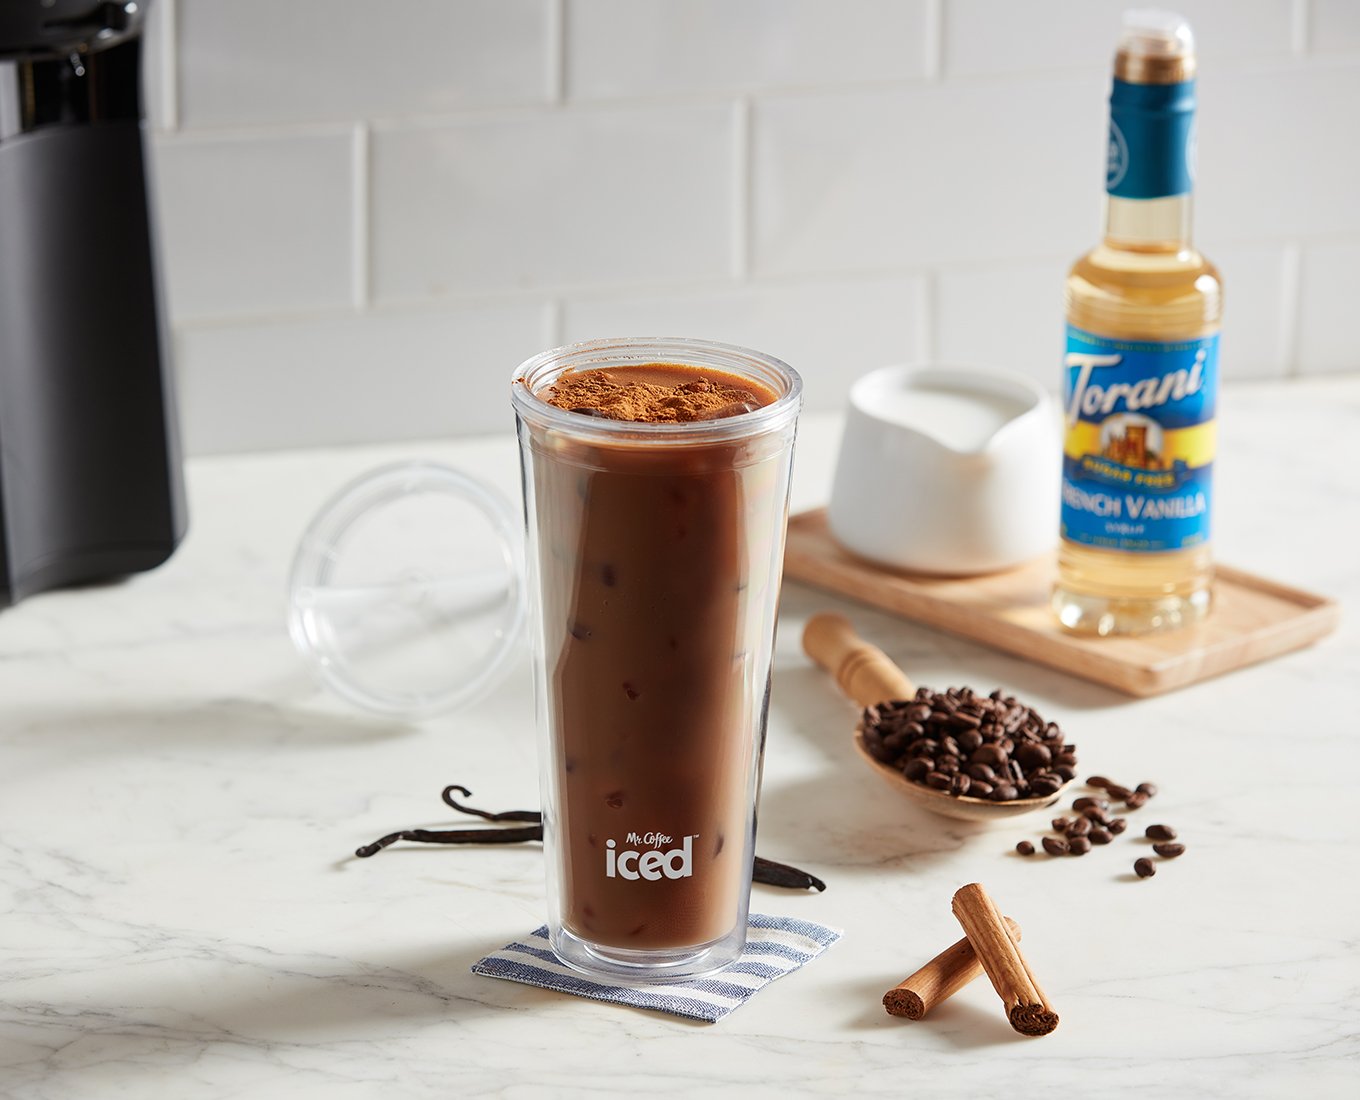 Mr. Coffee Iced Coffee Maker: Make Delicious Iced Coffee in Under